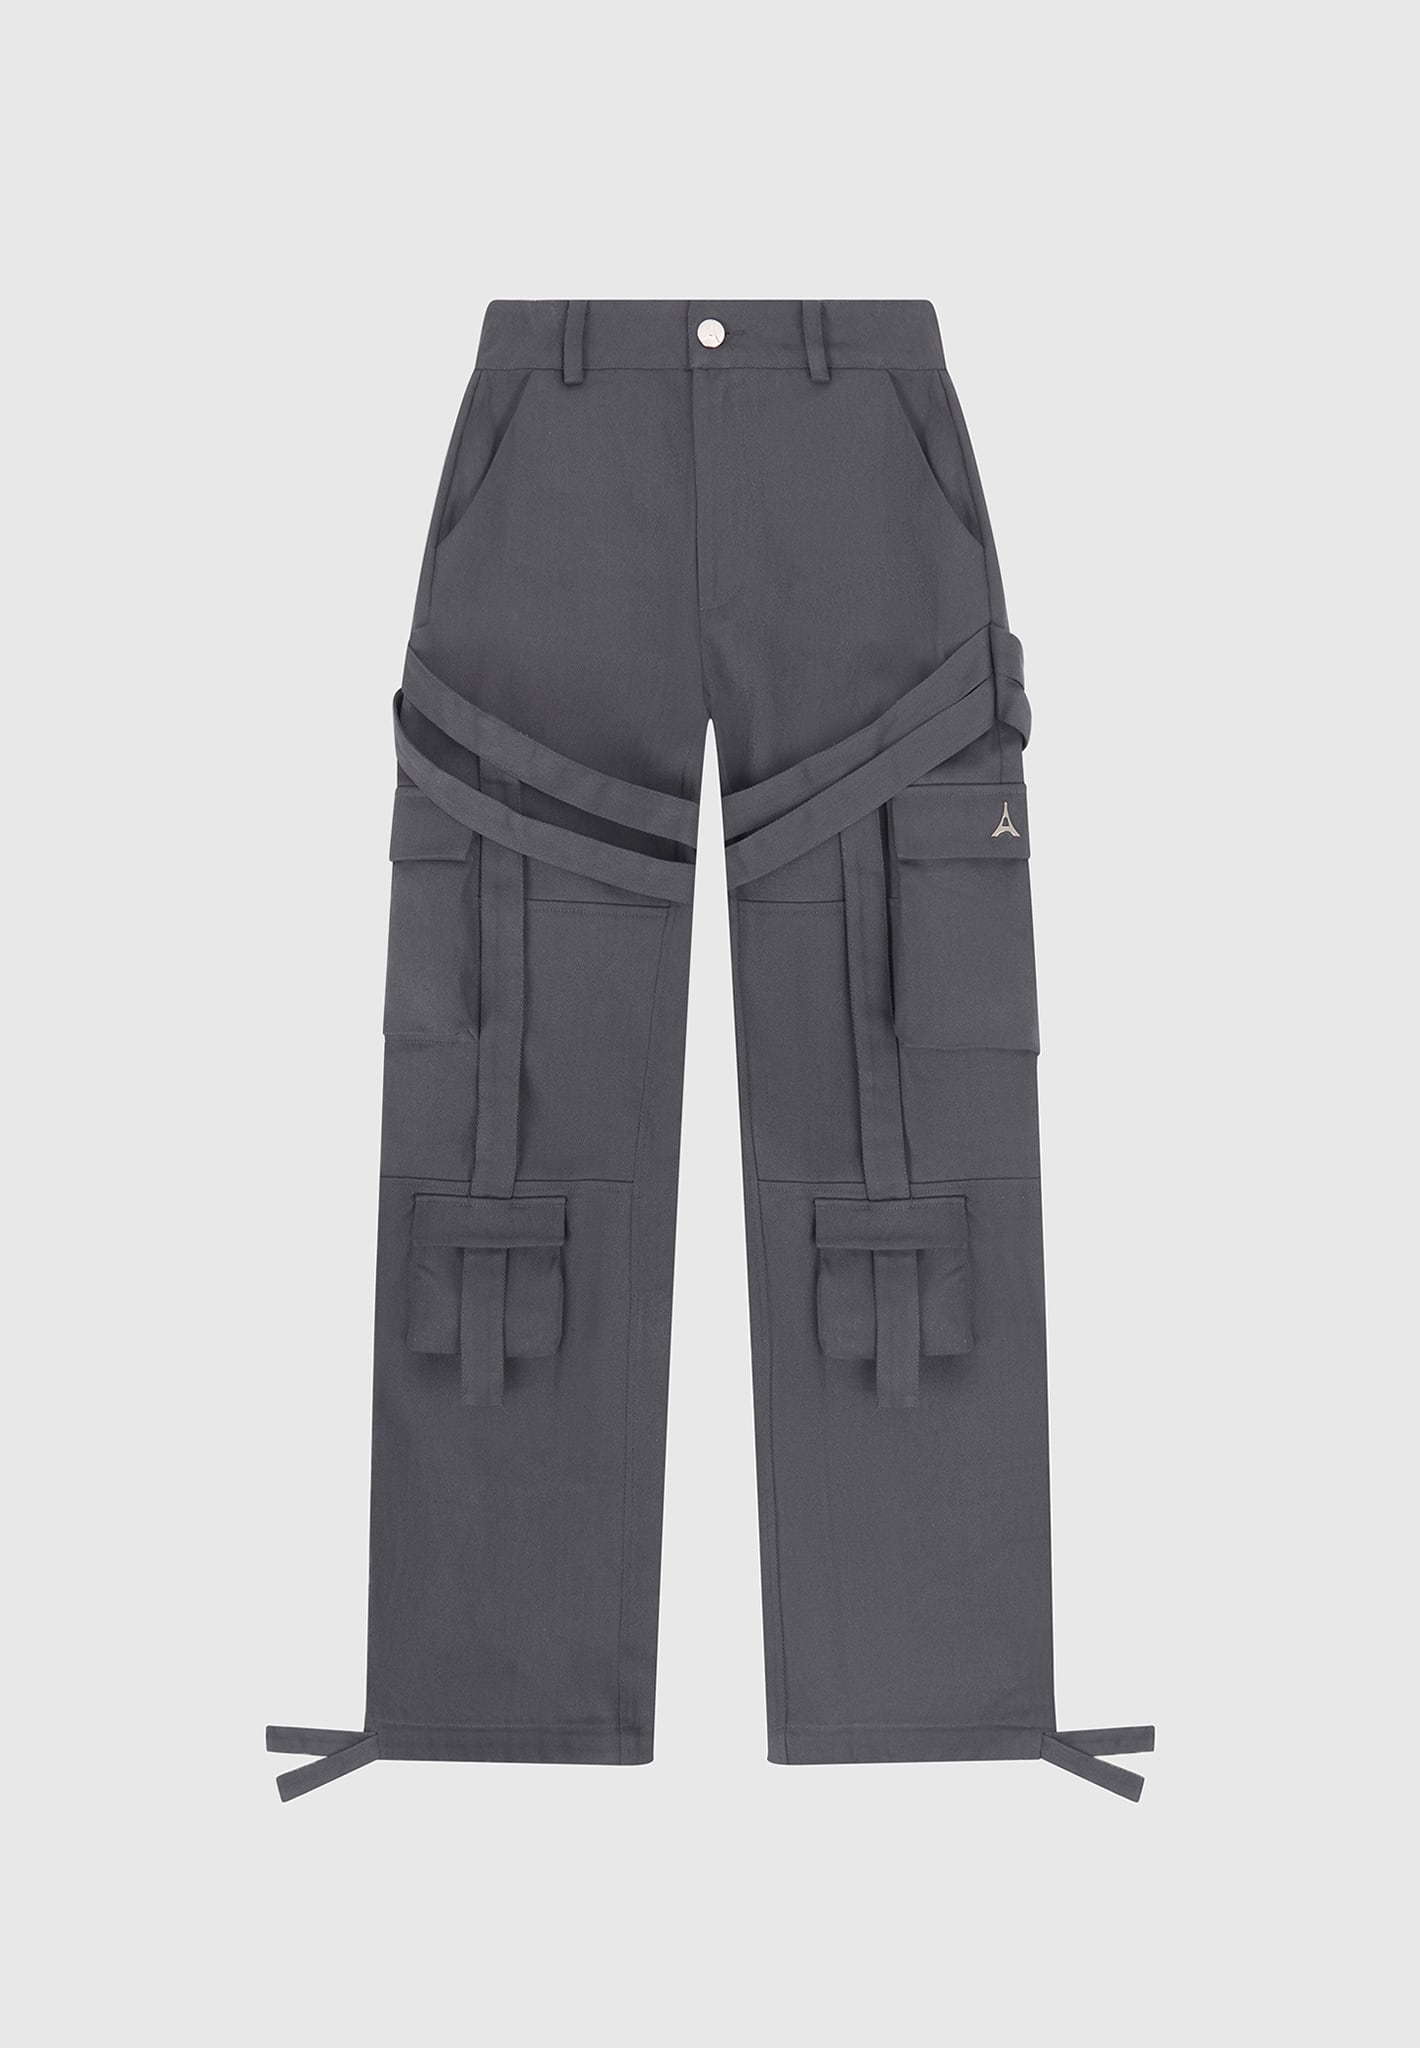 Fashion Men's Pants Suspenders, Stylish Suspenders for Men - China Pants  Suspenders and Mens Suspenders Pants price | Made-in-China.com